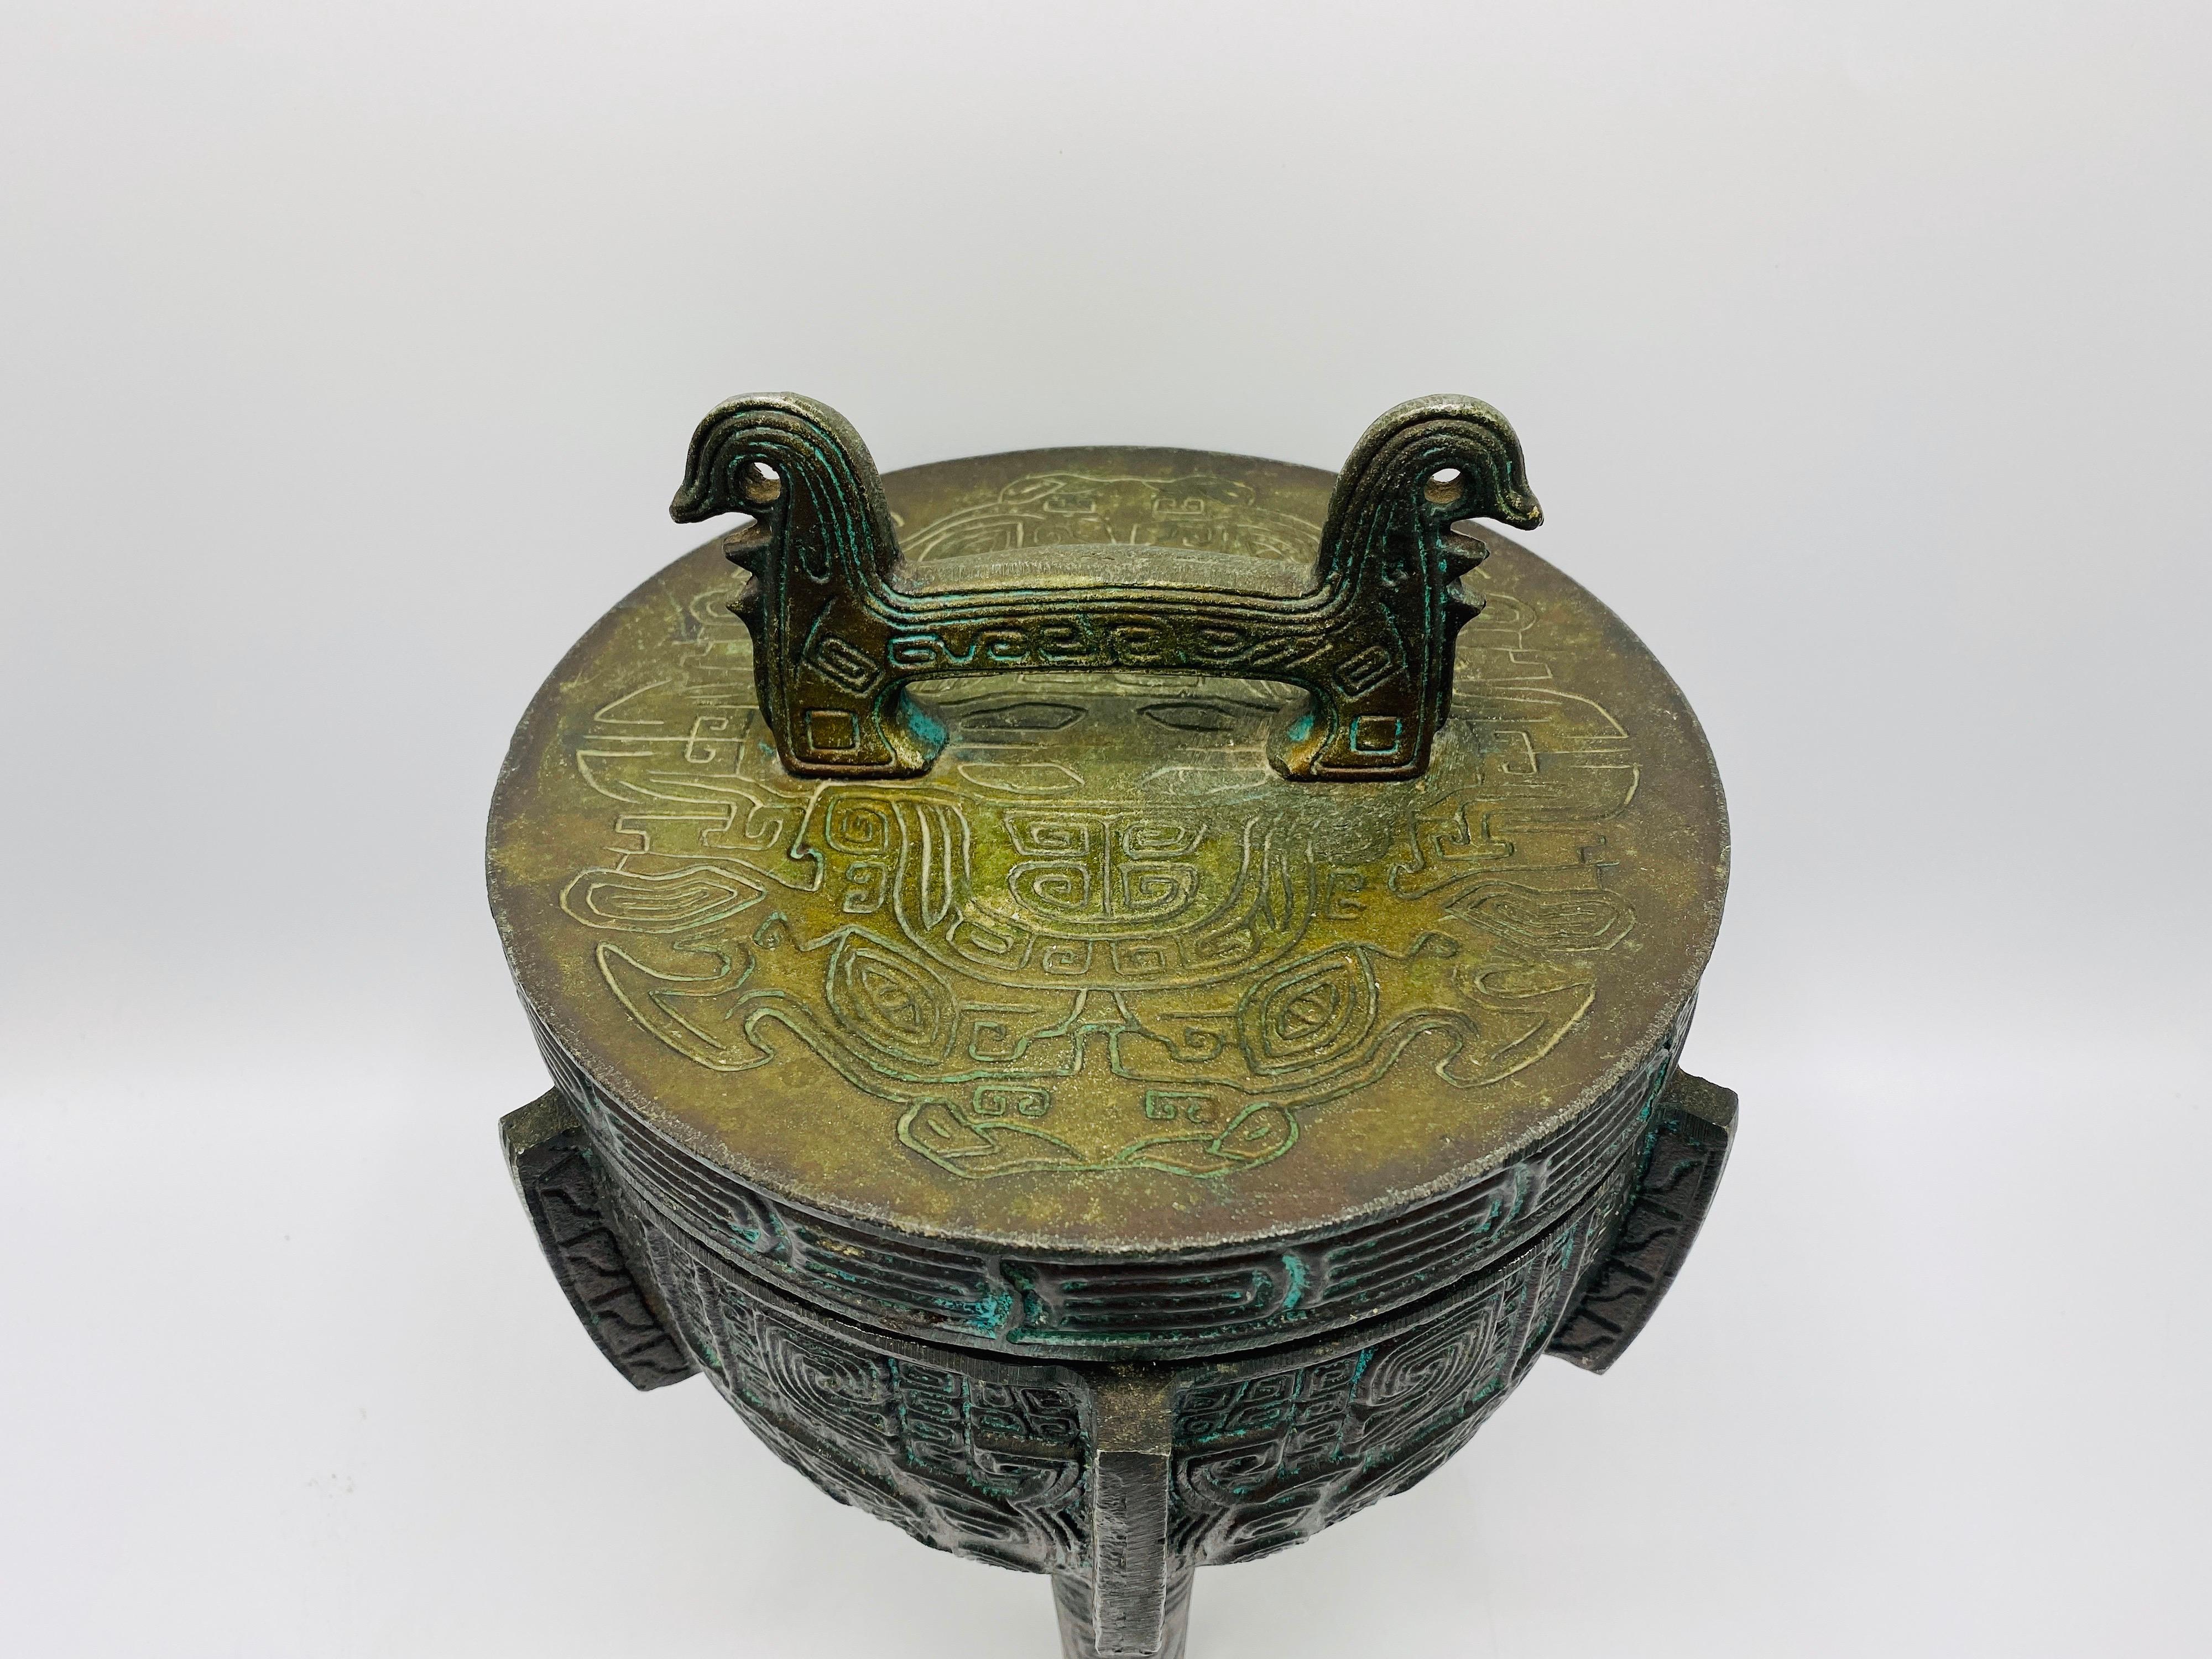 Listed is a fabulous, 1970s James Mont style ice bucket, in the style of Tony Duquette and James Mont. This Hollywood Regency barware piece is exquisite, with a hint of chinoiserie flare! The cast metal exterior has a distinct, Greek key motif